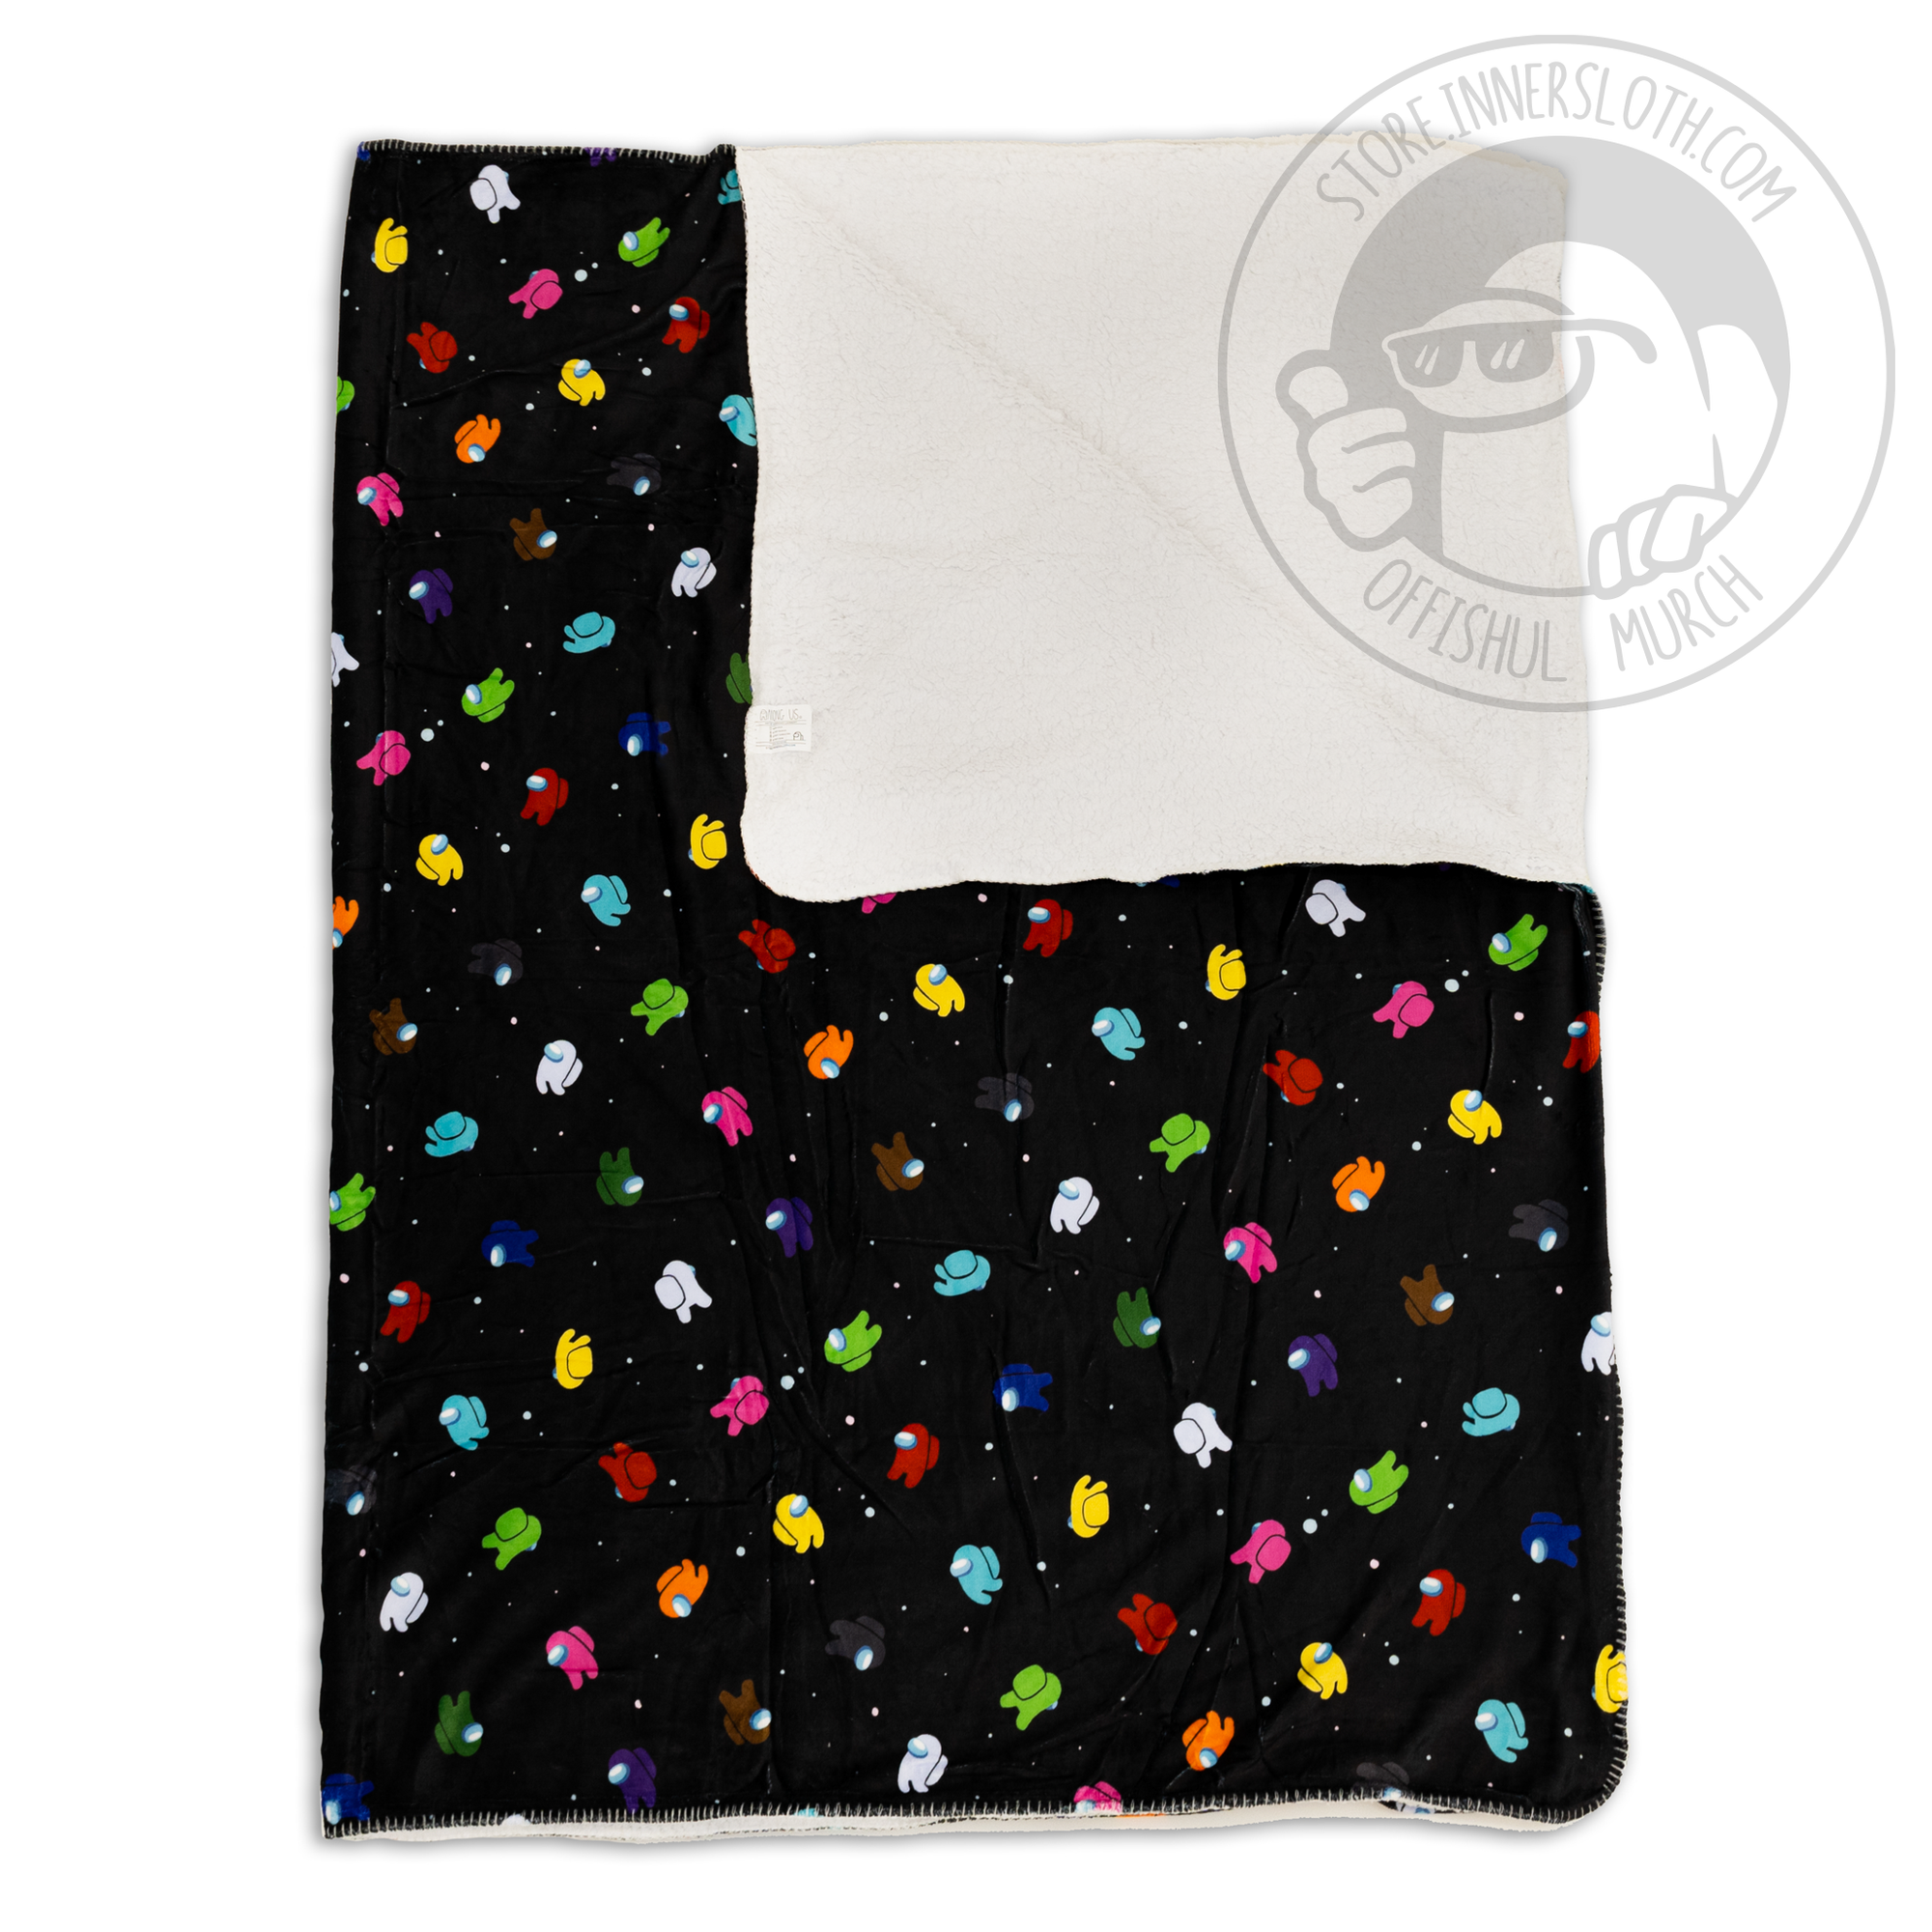 A black Among Us blanket featuring the colorful Crewmates "Space Party" pattern, which consists of evenly-spaced Crewmates of all colors floating on a black space background. The blanket is folded, with the top right corner folded back to show the white sherpa lining.